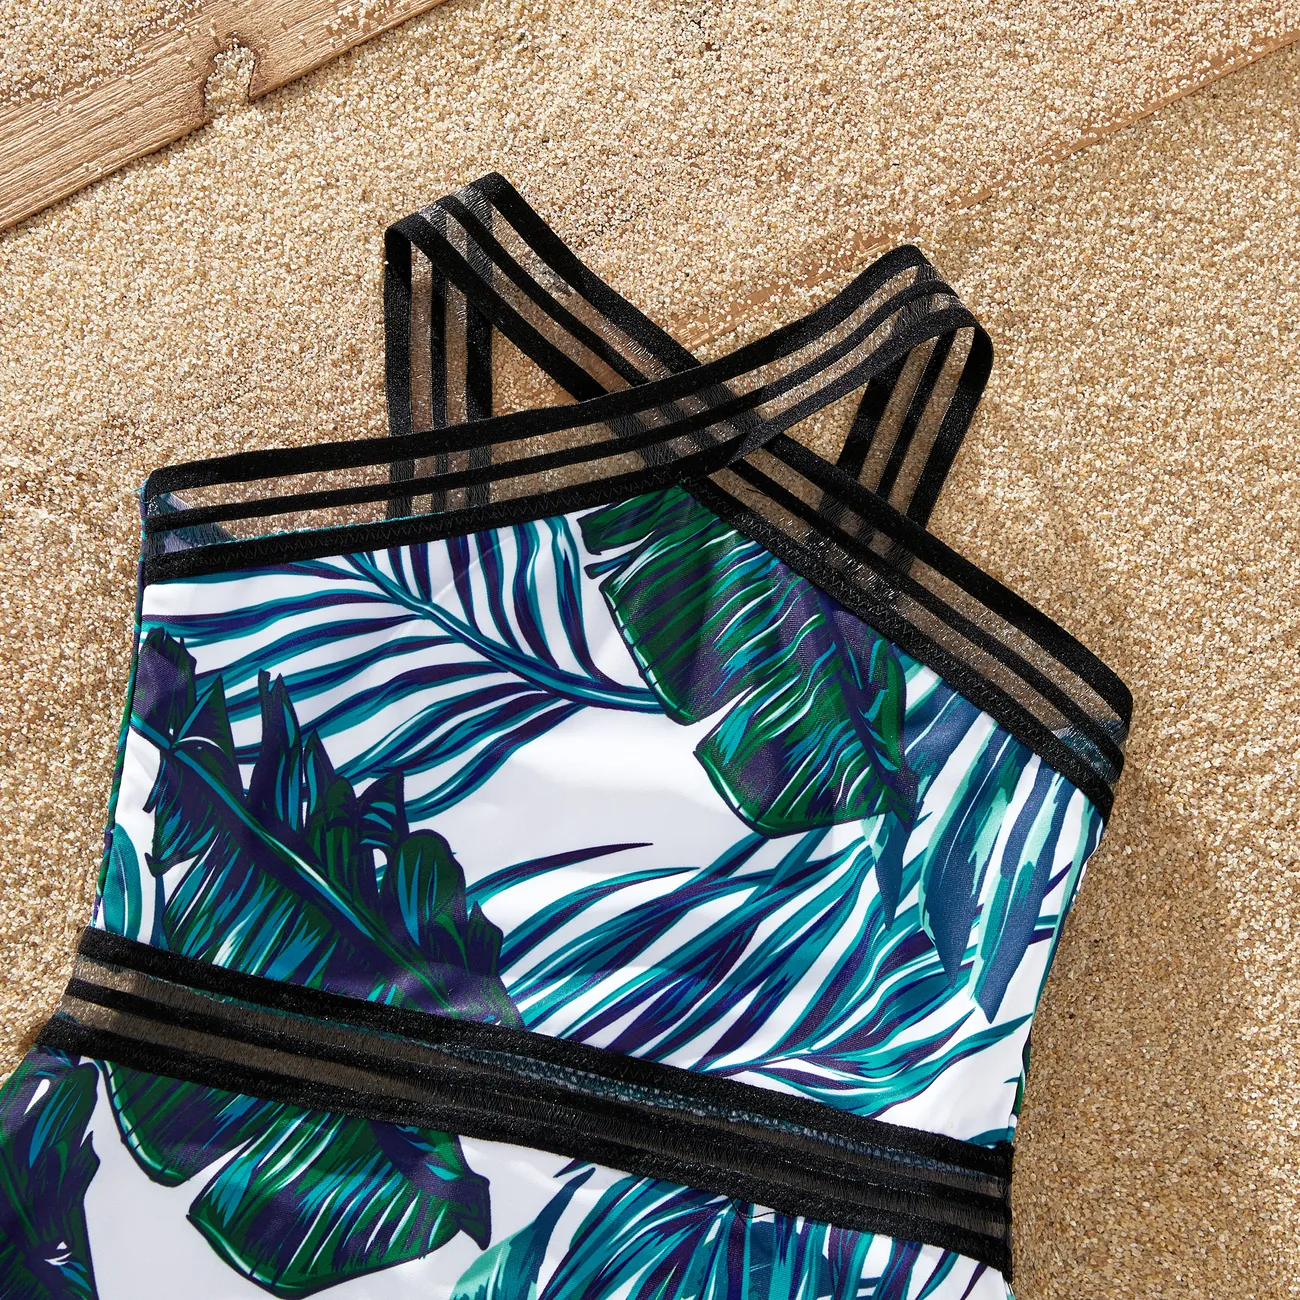 Family Matching Allover Palm Leaf Print Crisscross One-piece Swimsuit and Swim Trunks Green big image 1